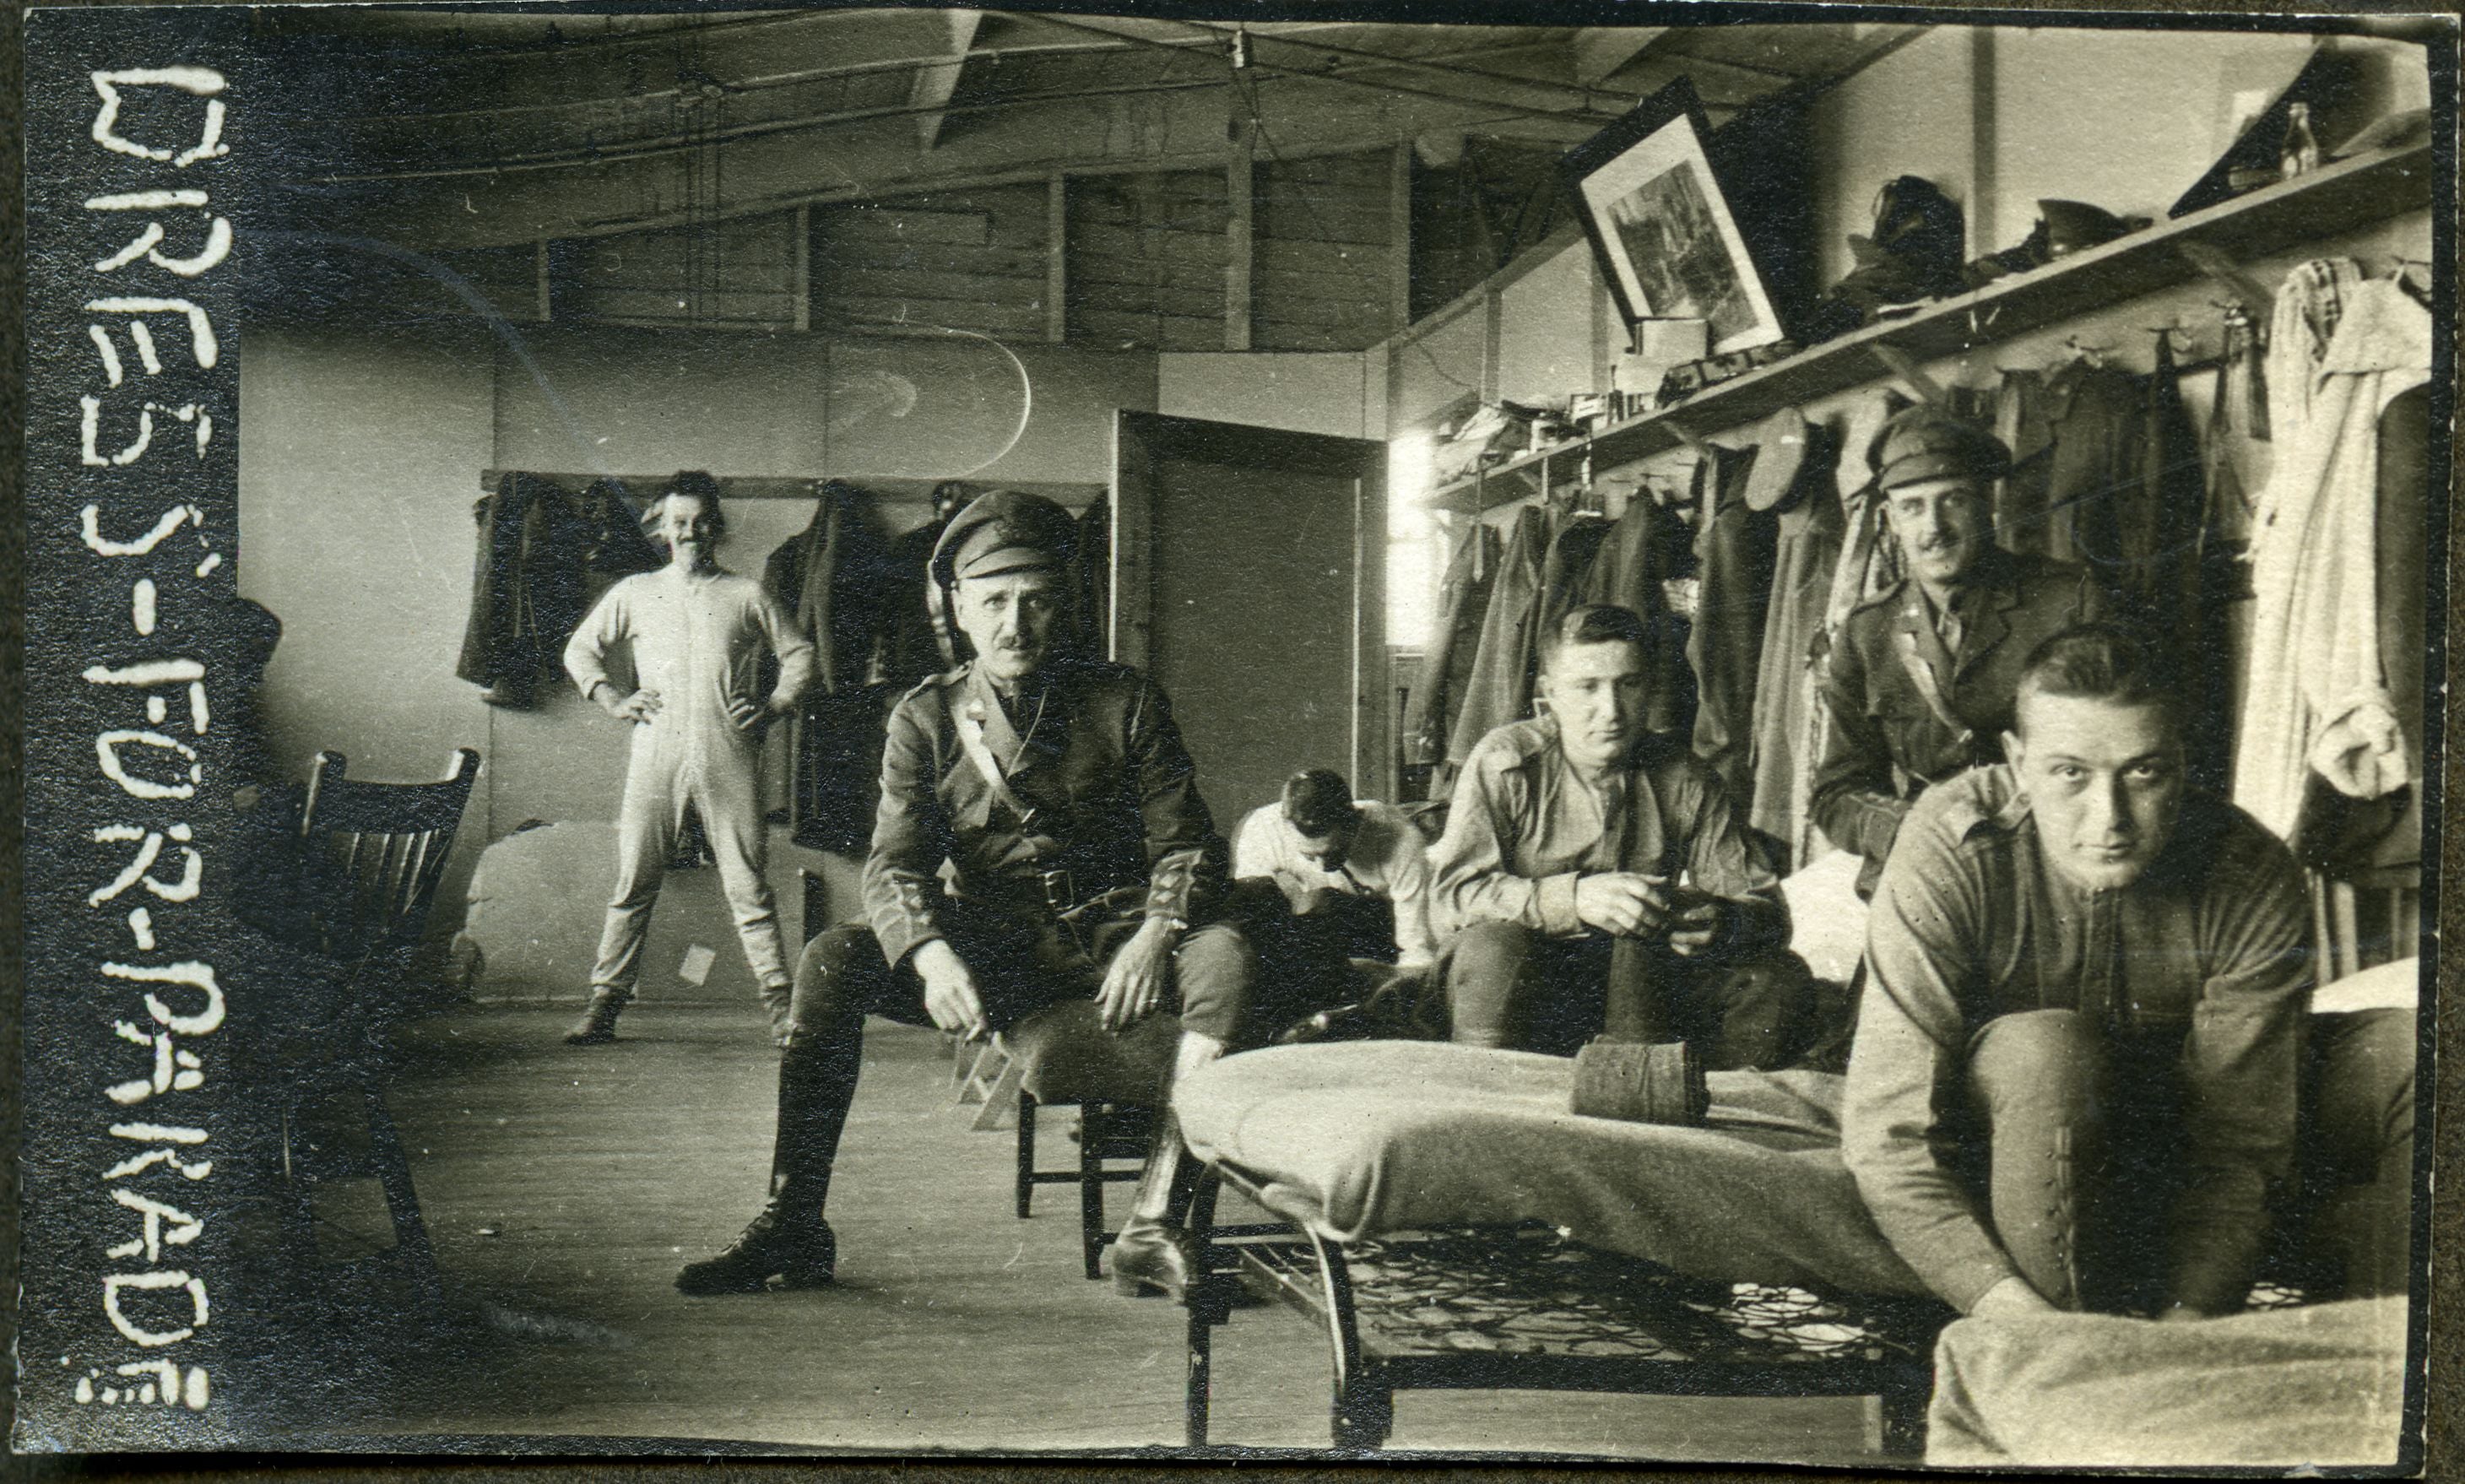 Several WWI soldiers in barracks getting dressed.